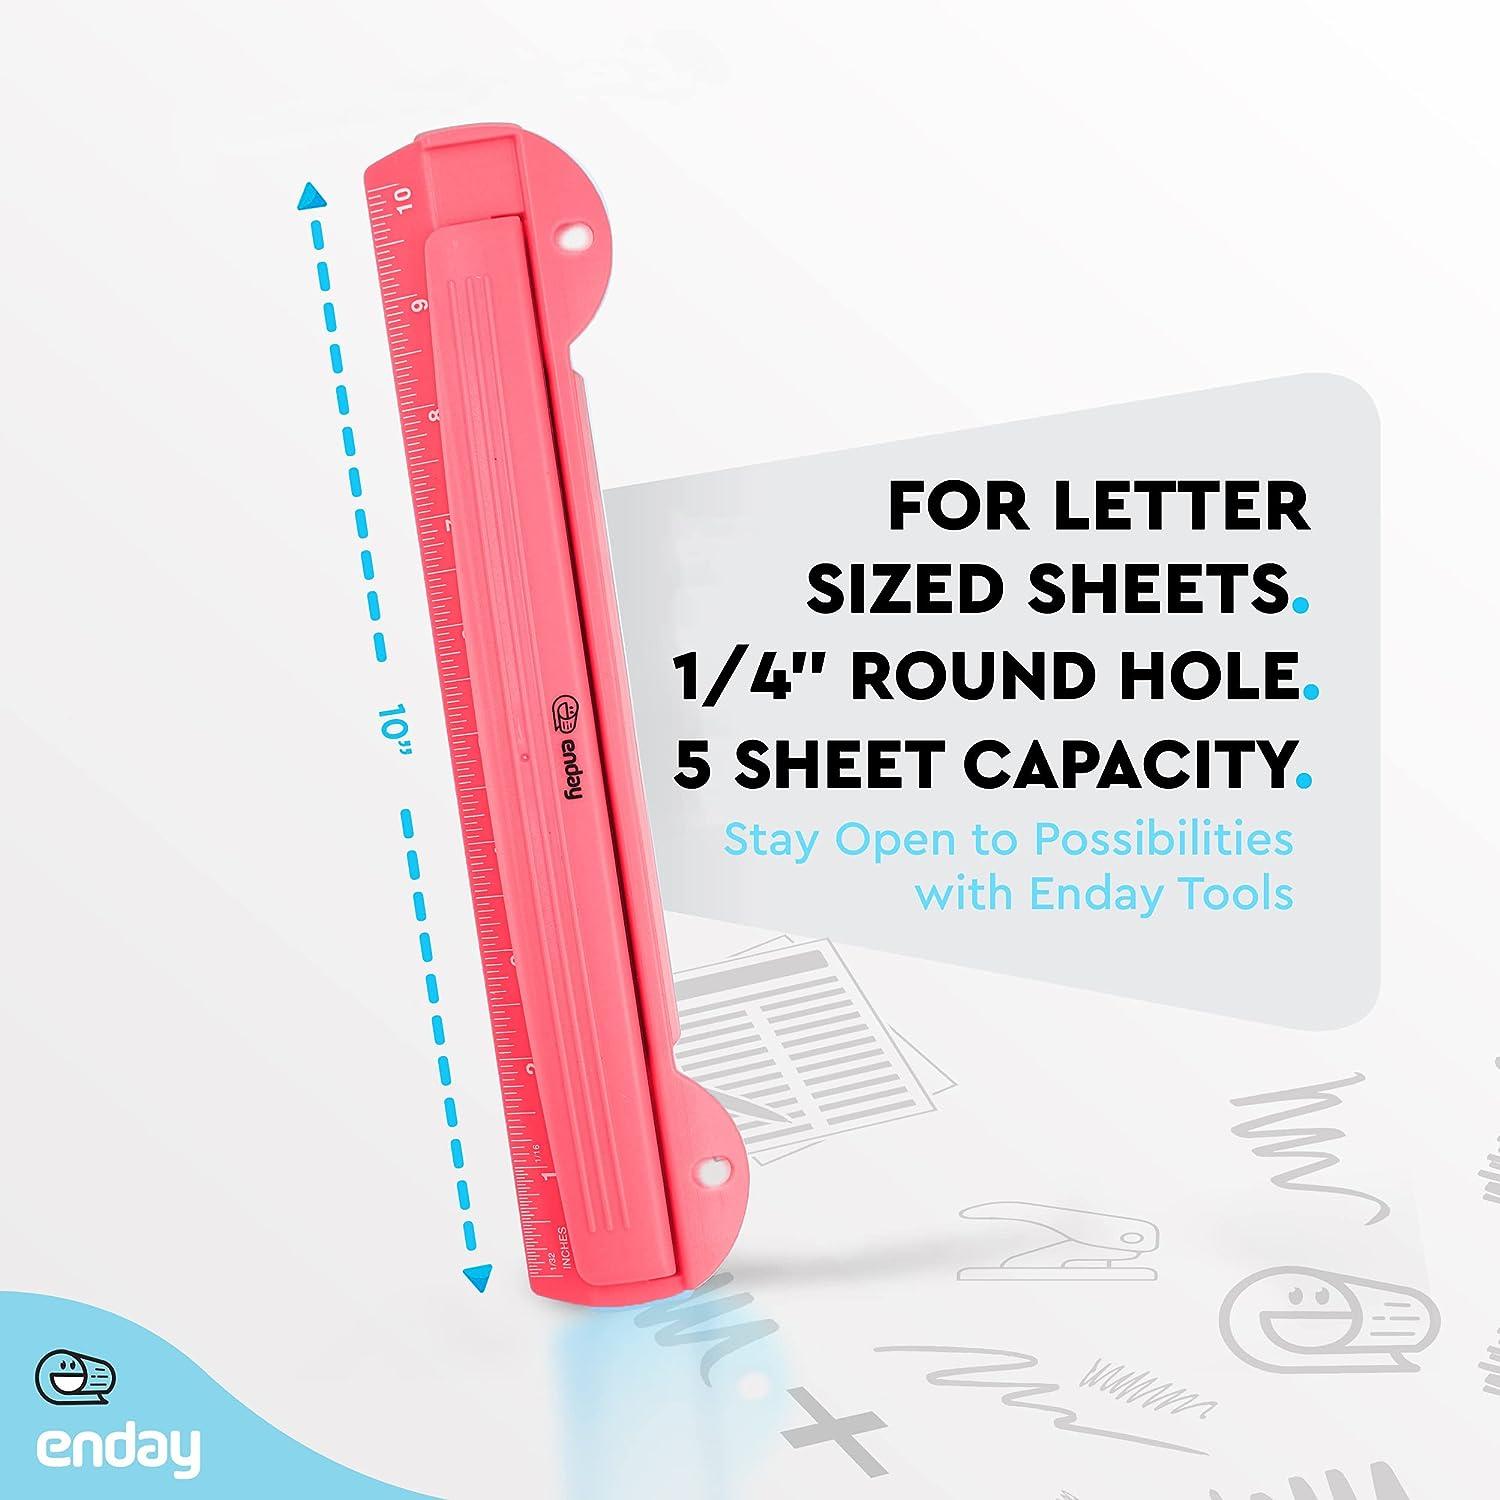 Discover the Joy of Hole Punching with These Hole Punch Printables